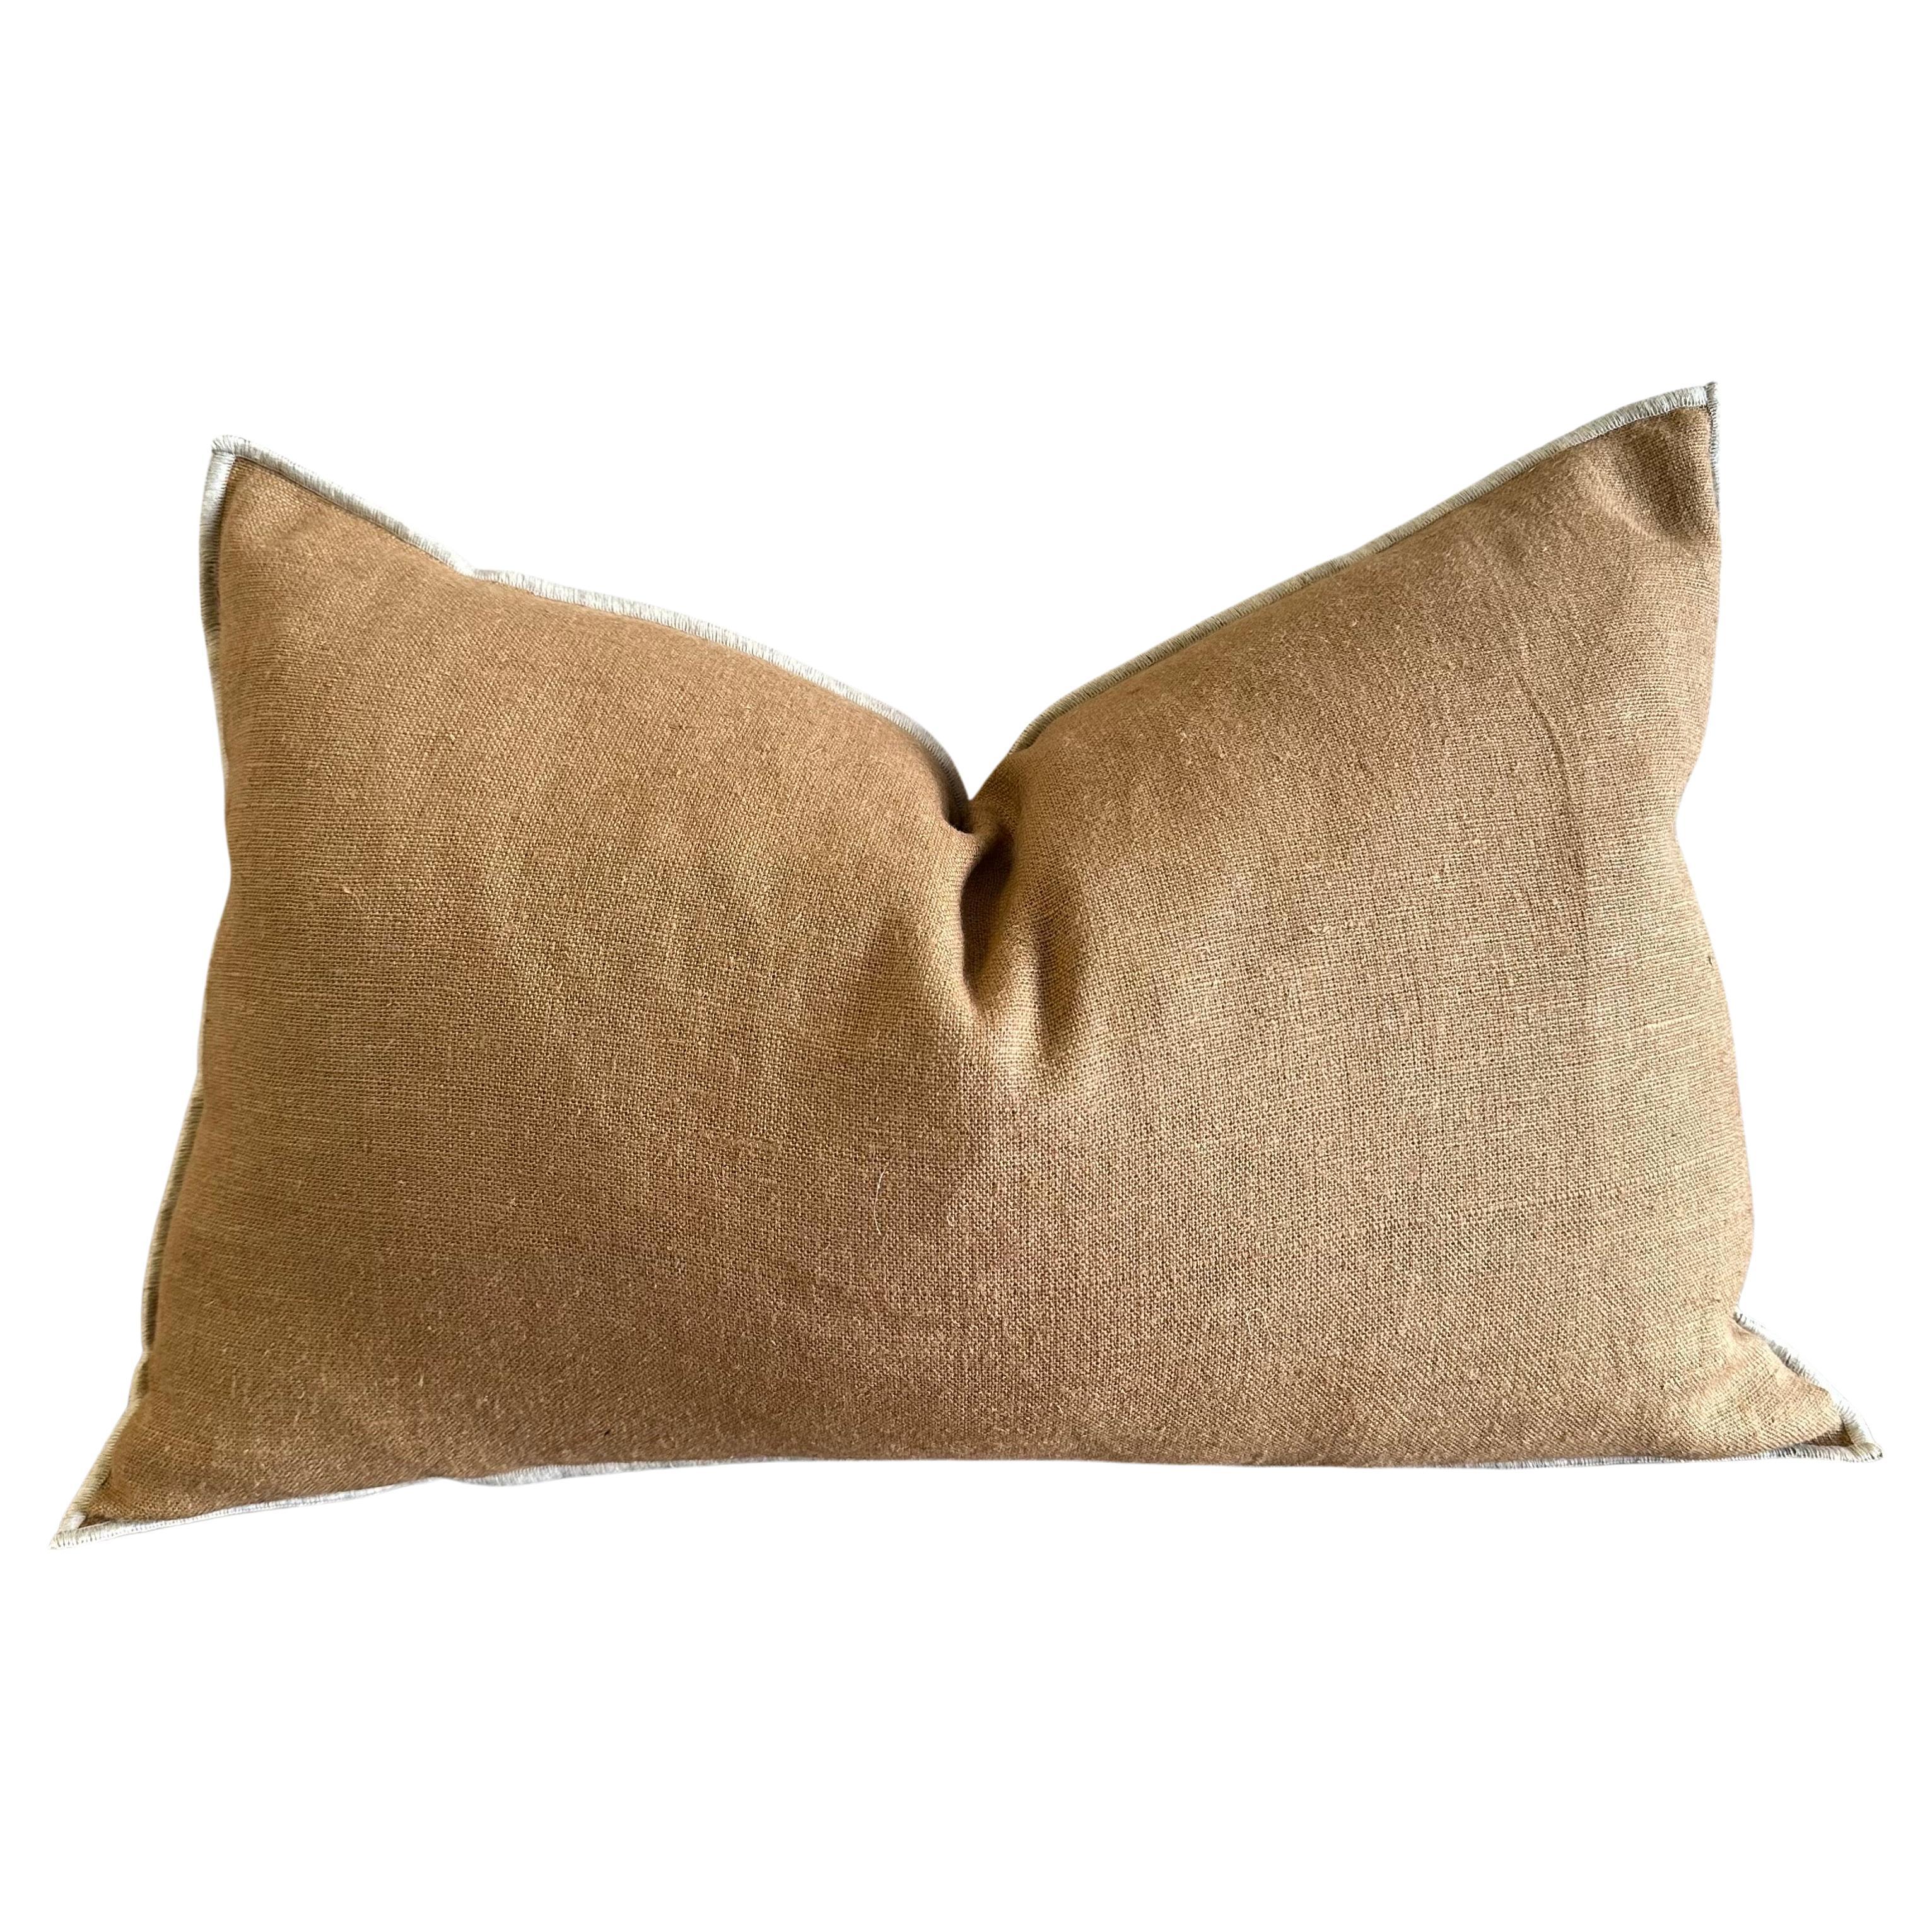 French Flax Linen Accent Pillow in Tabac